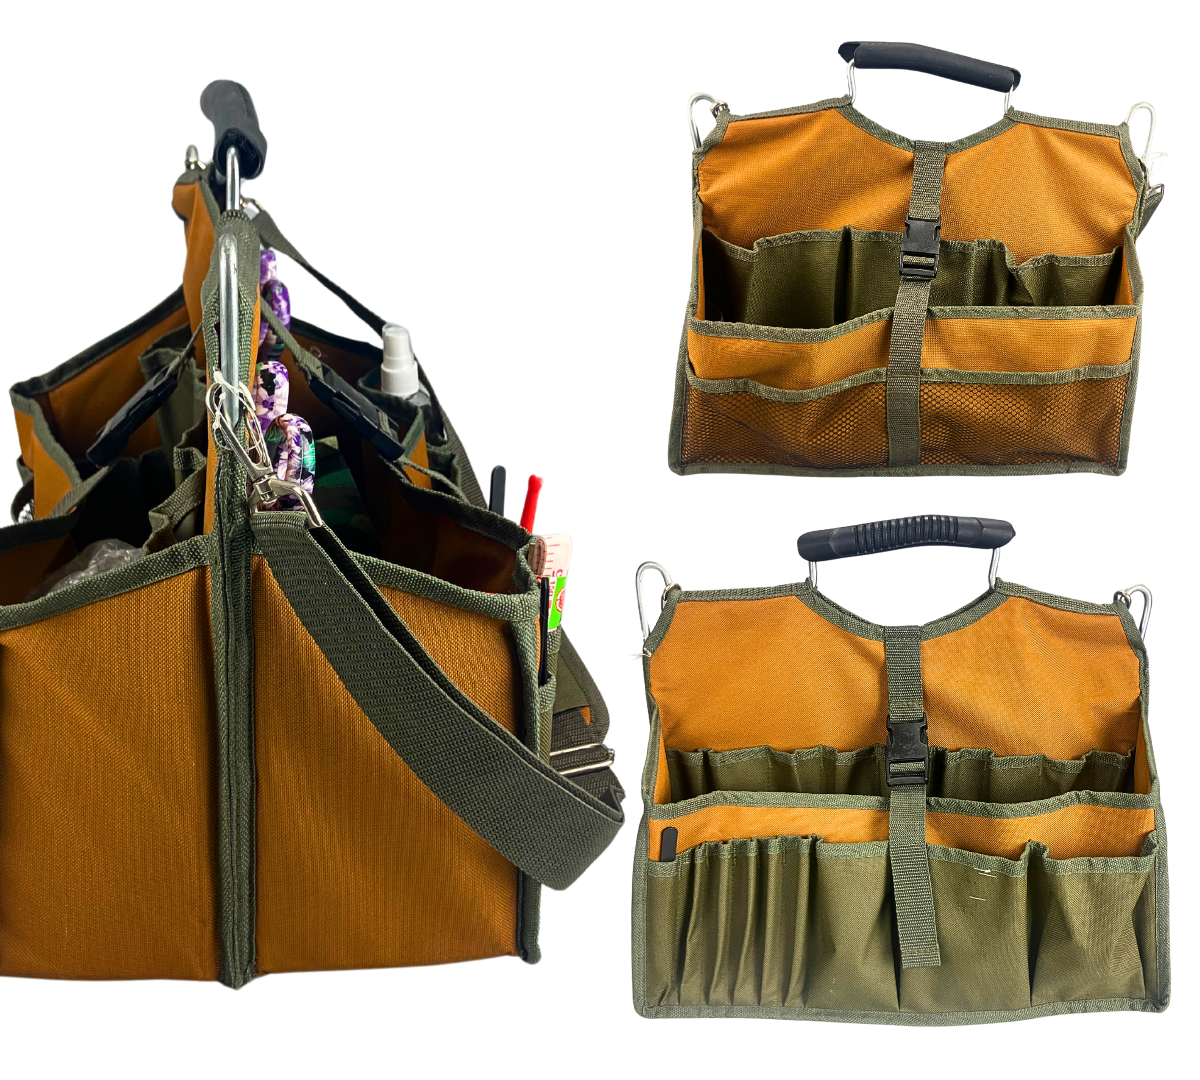 Soft-Sided Tool Bag with Metal Bar Reinforcement  - NB-11091